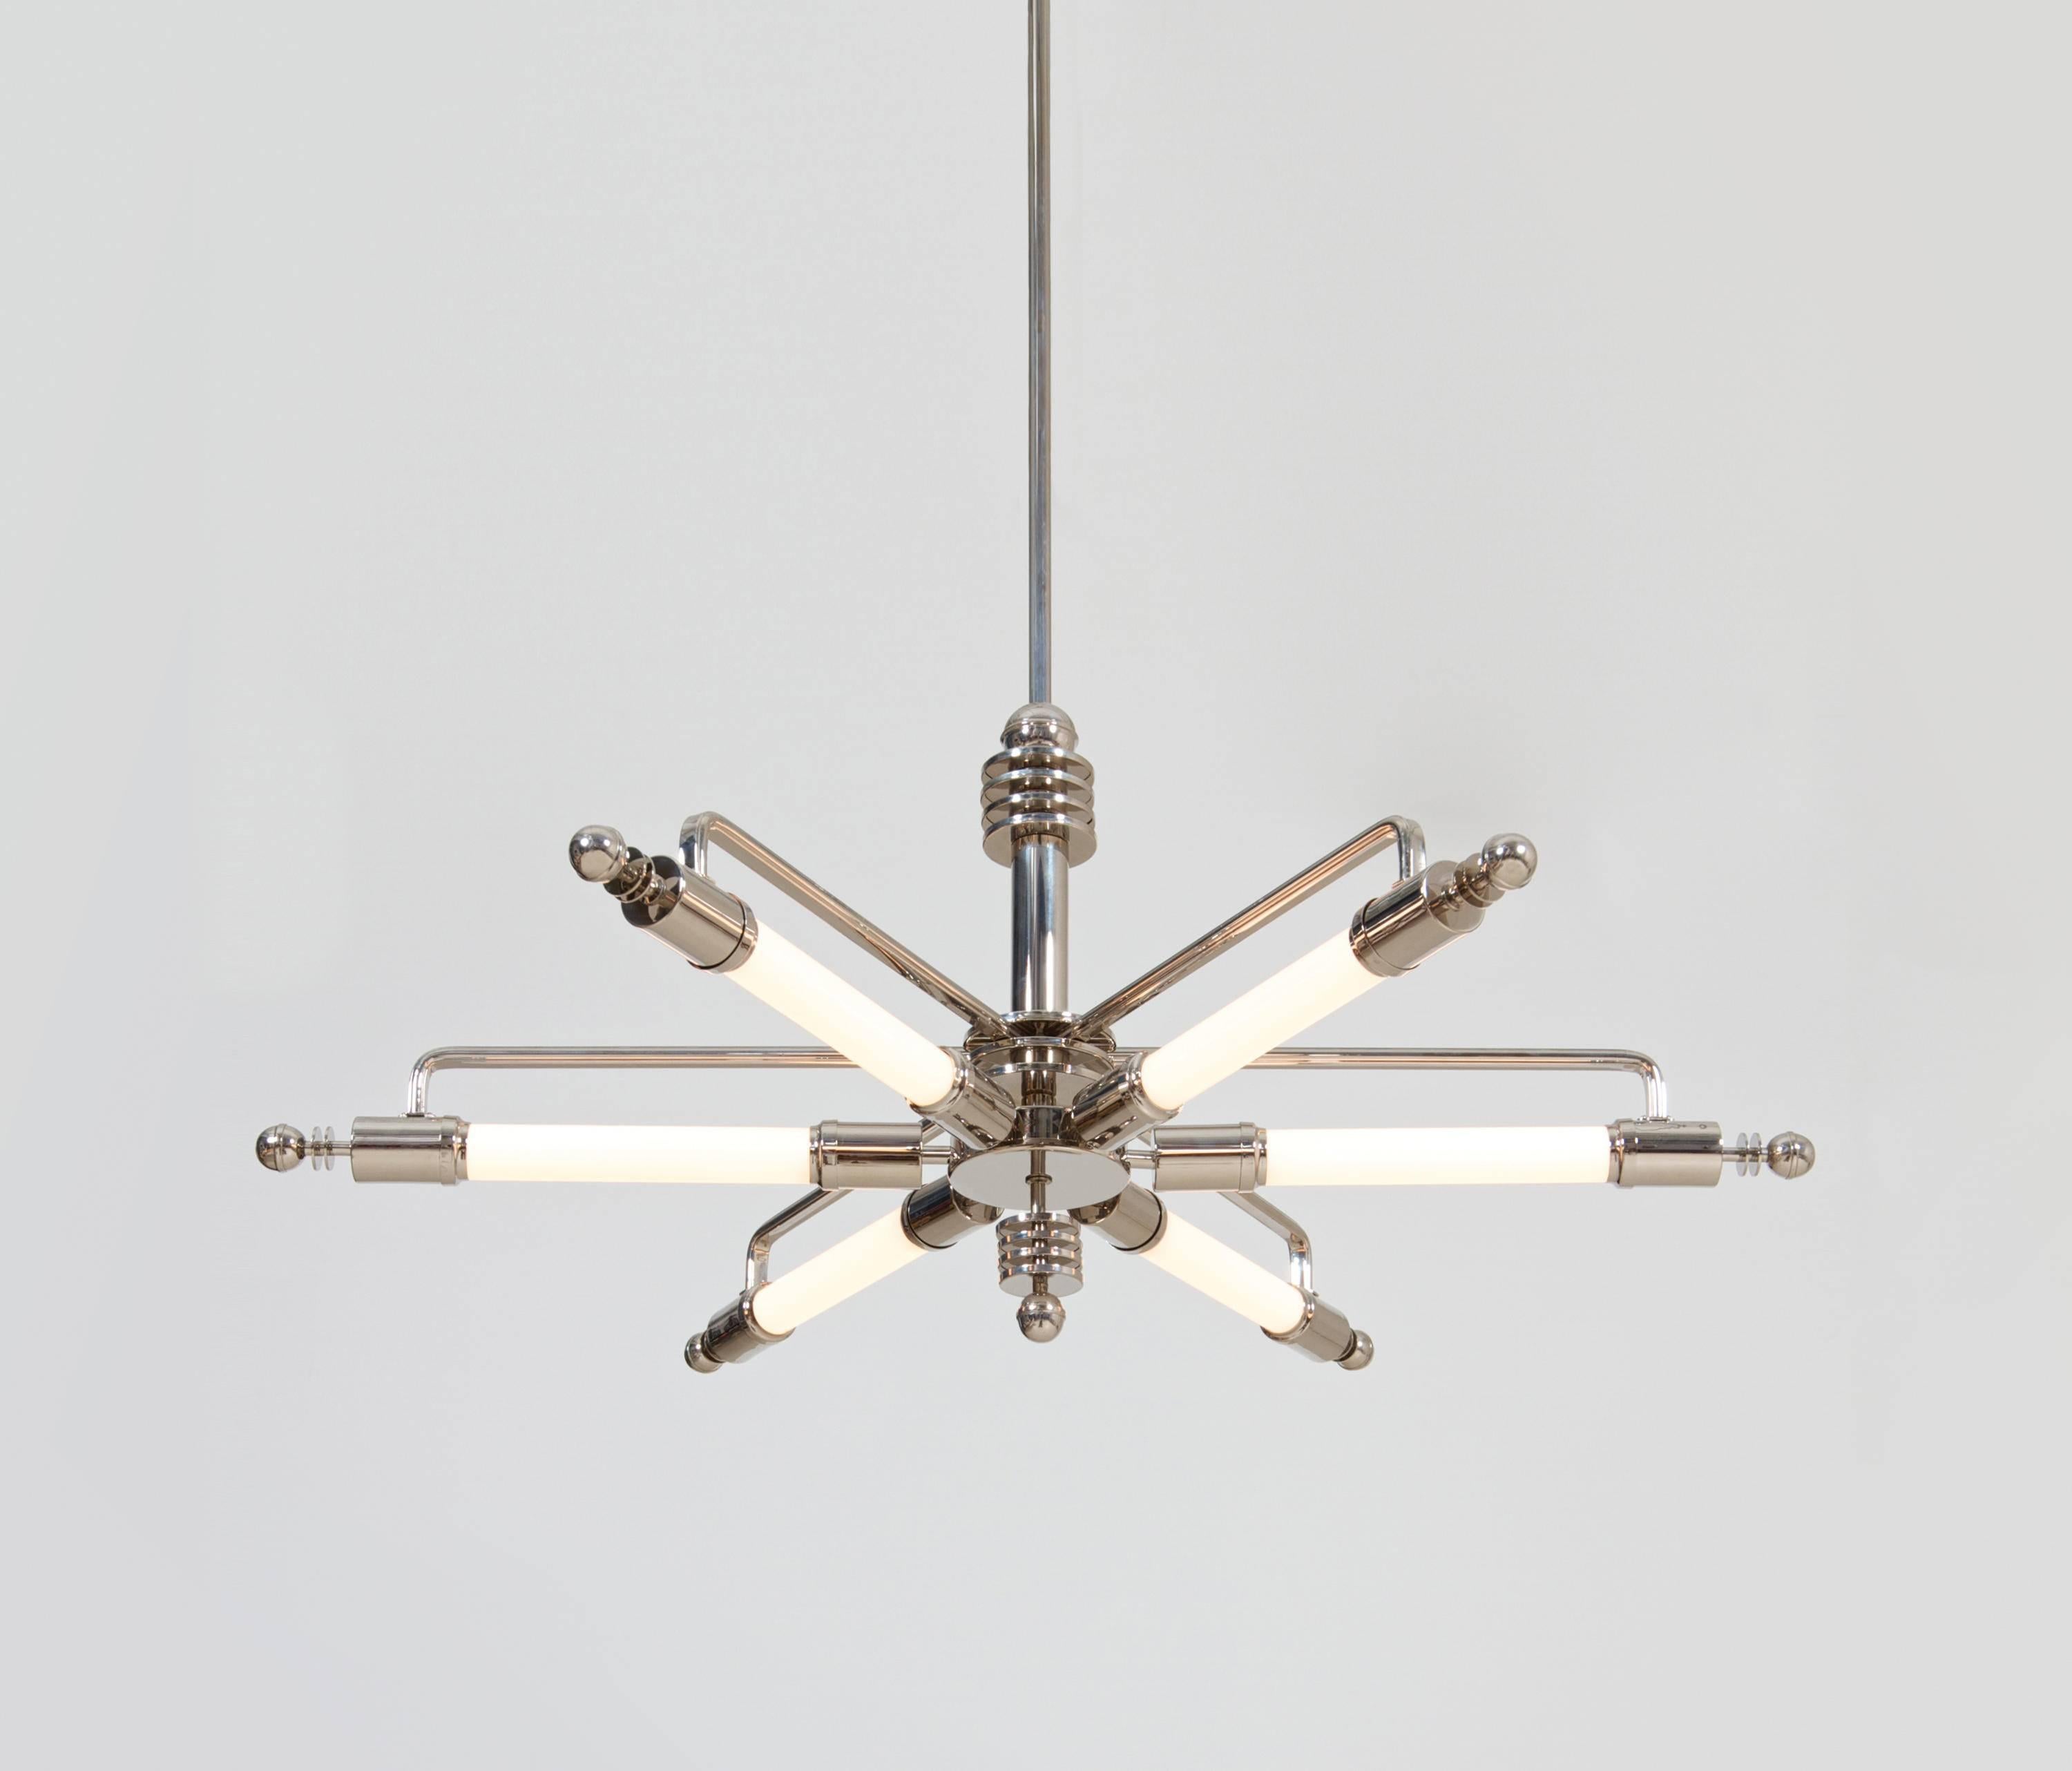 Machine Age pendant light manufactured by GMD Berlin, design 1928.
Technical details: Six sockets E 27, soffitten-lights (tube lights), the pendant length is variable.